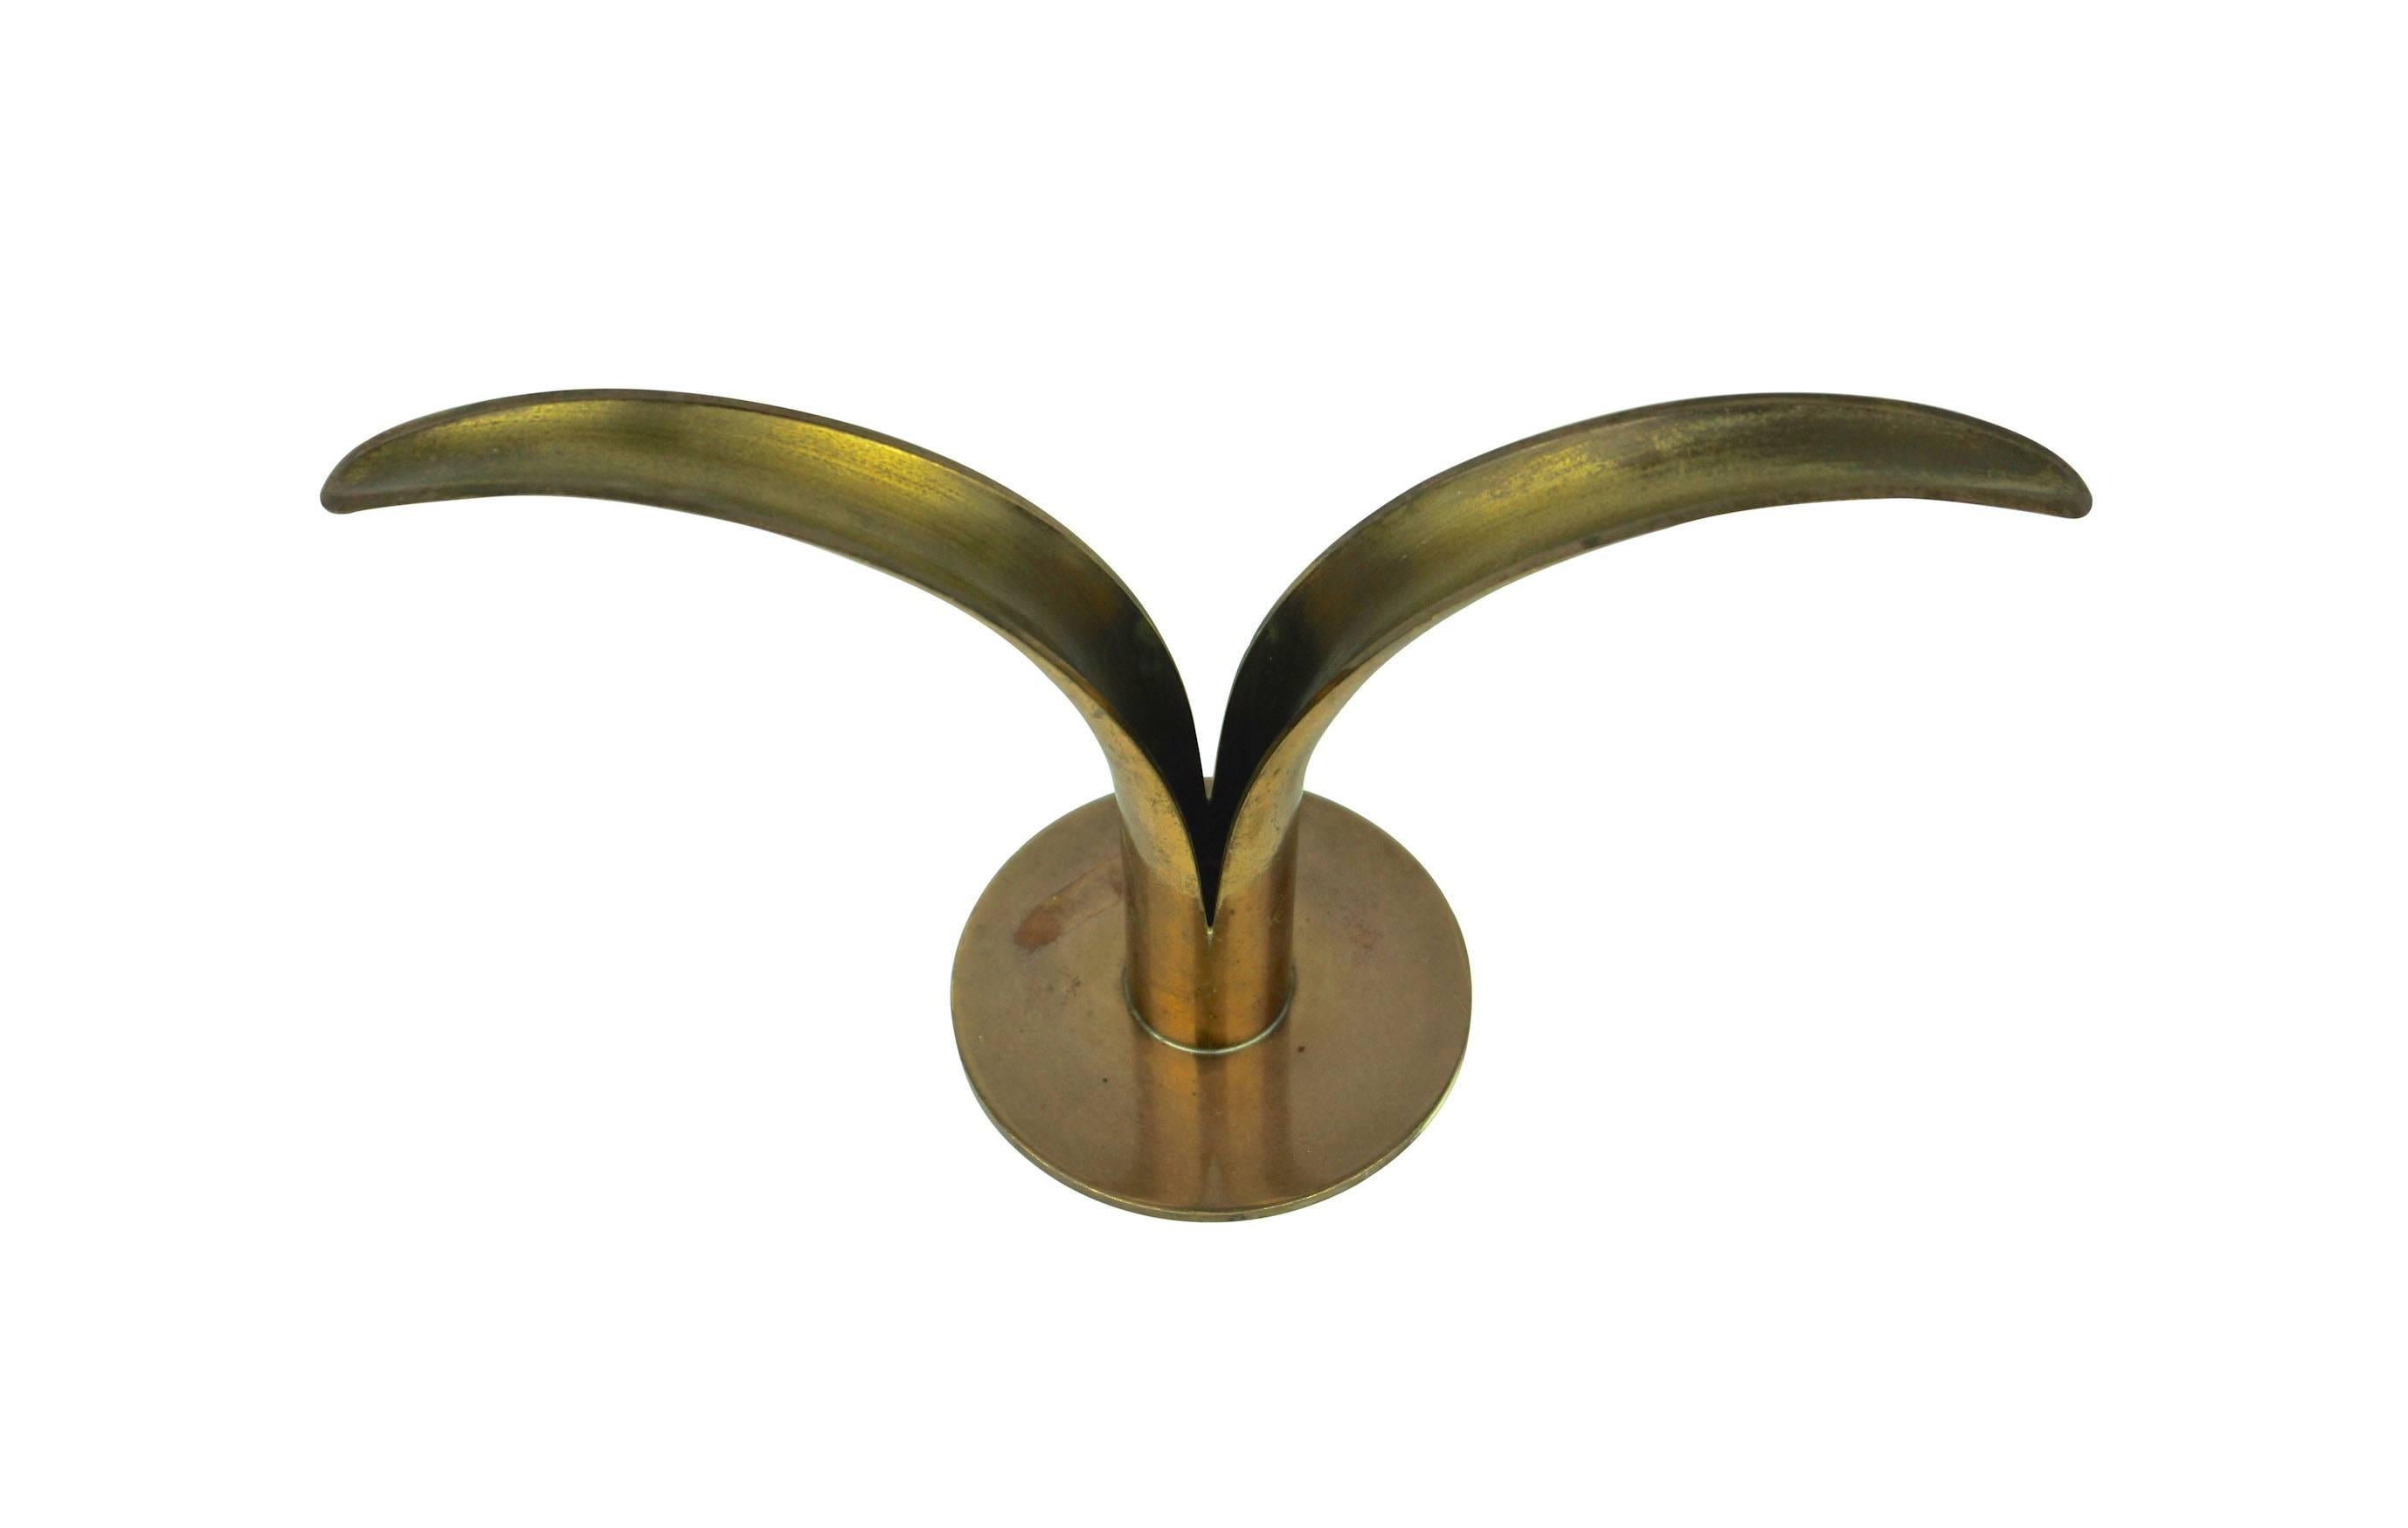 A brass candle holder designed by Ivar Ålenius Björk "Lily", produced by Ystad Metall in Sweden. In beautiful original patinated condition.